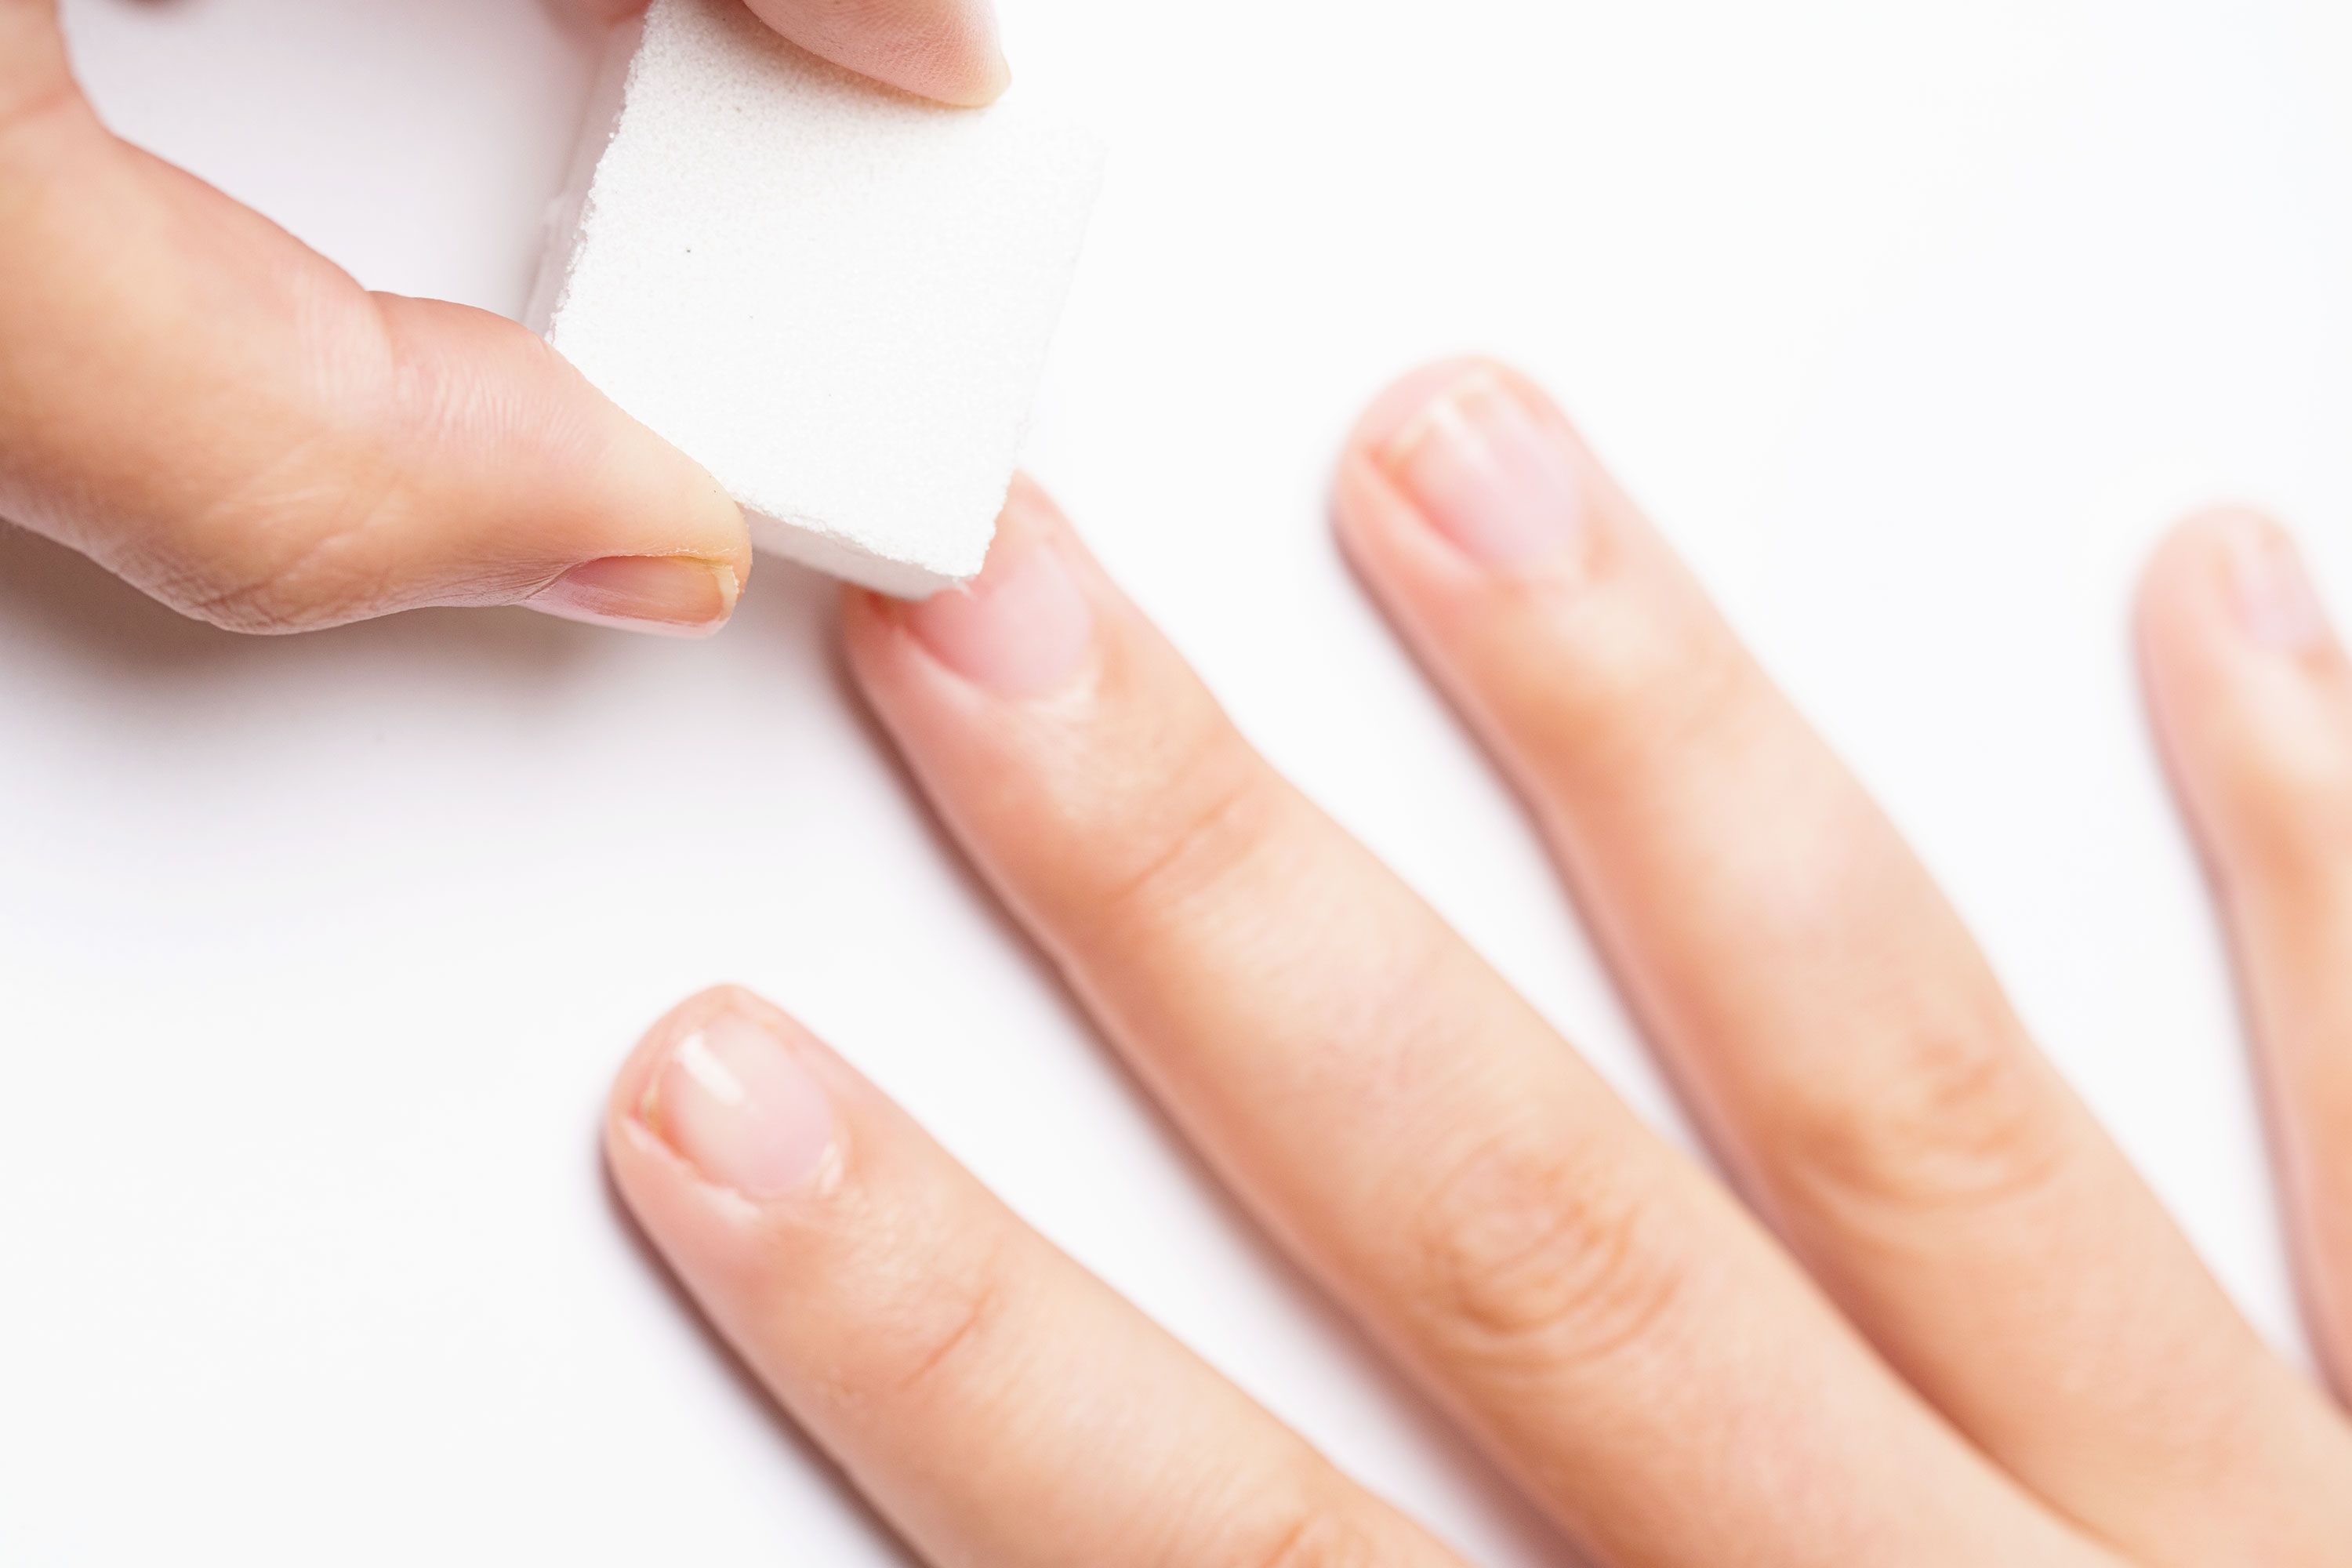 How to Fix a Broken Nail With a Tea Bag - Nail Care Trick